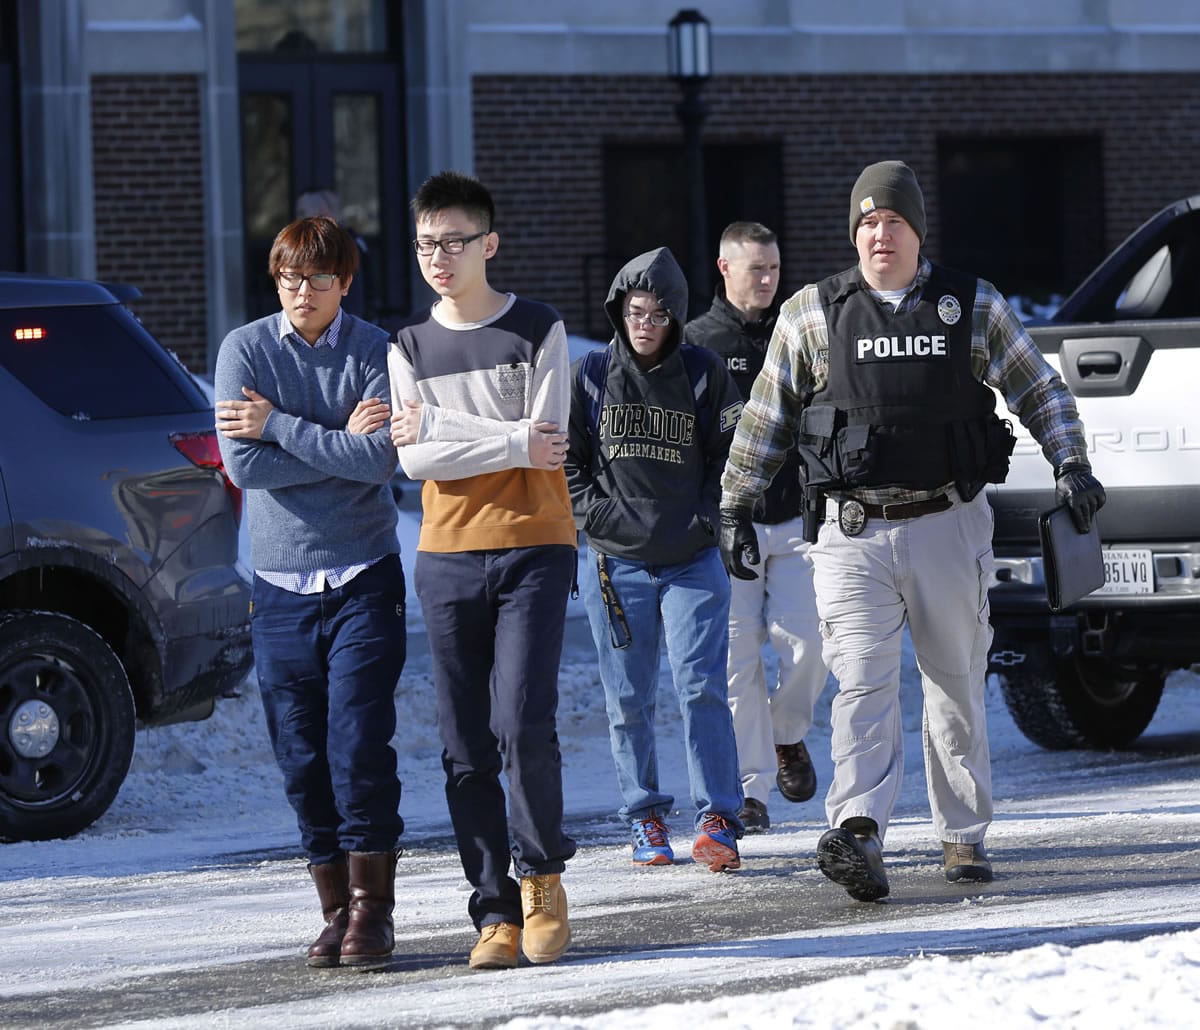 Police evacuate students from the Electrical Engineering building after shots were fired on Tuesday on the campus of Purdue University in West Lafayette, Ind.